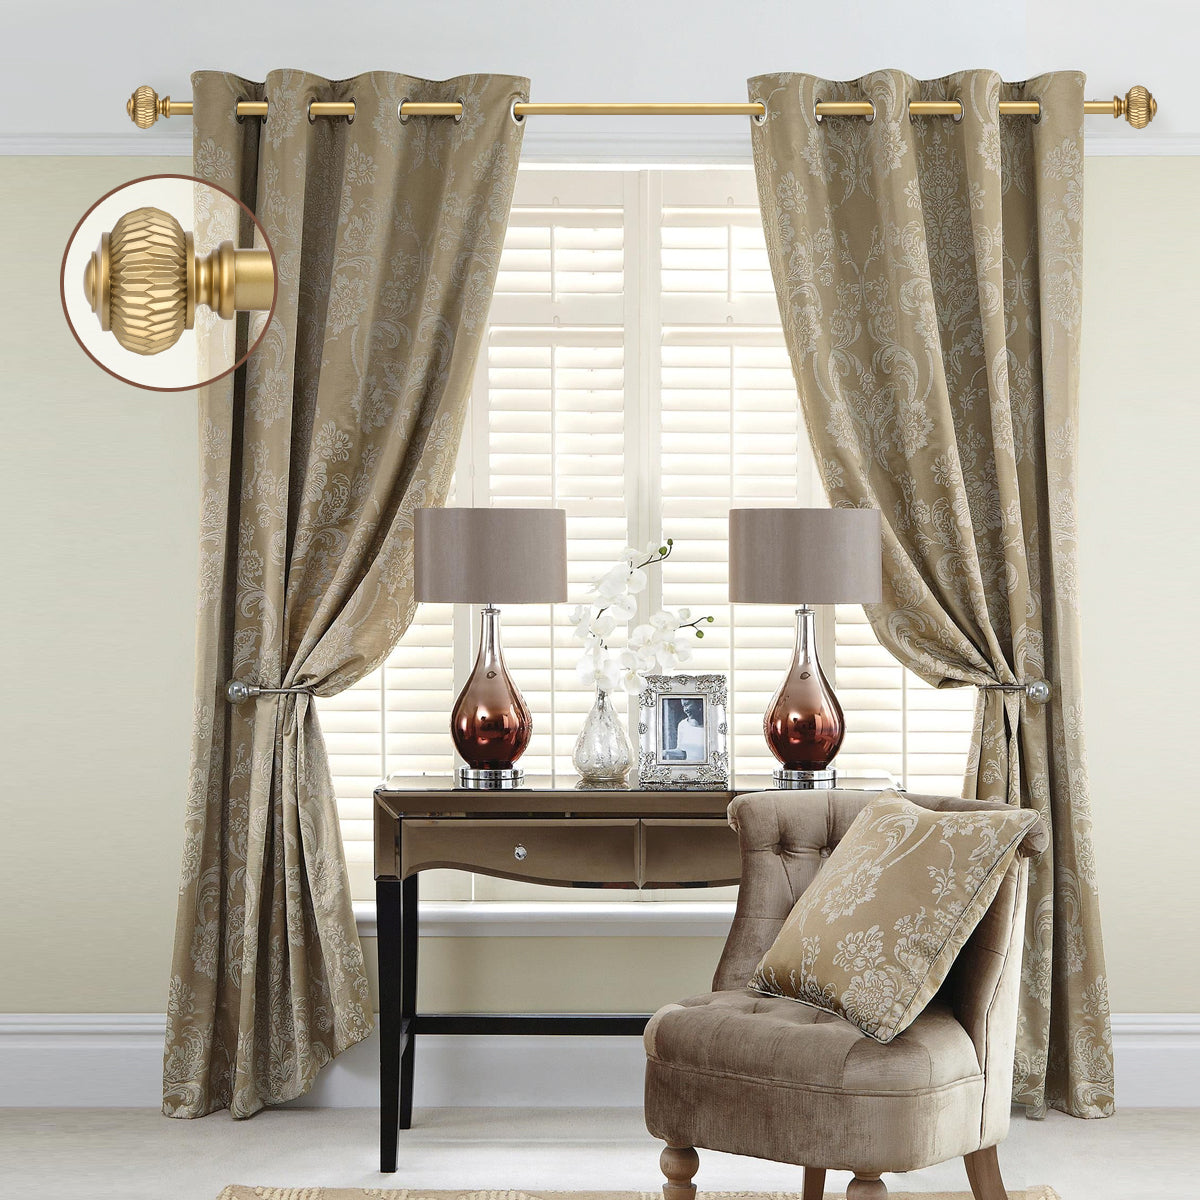 1" Empyrean Grace Golden Curtain Rod with Lantern Finials, 22-42 inches